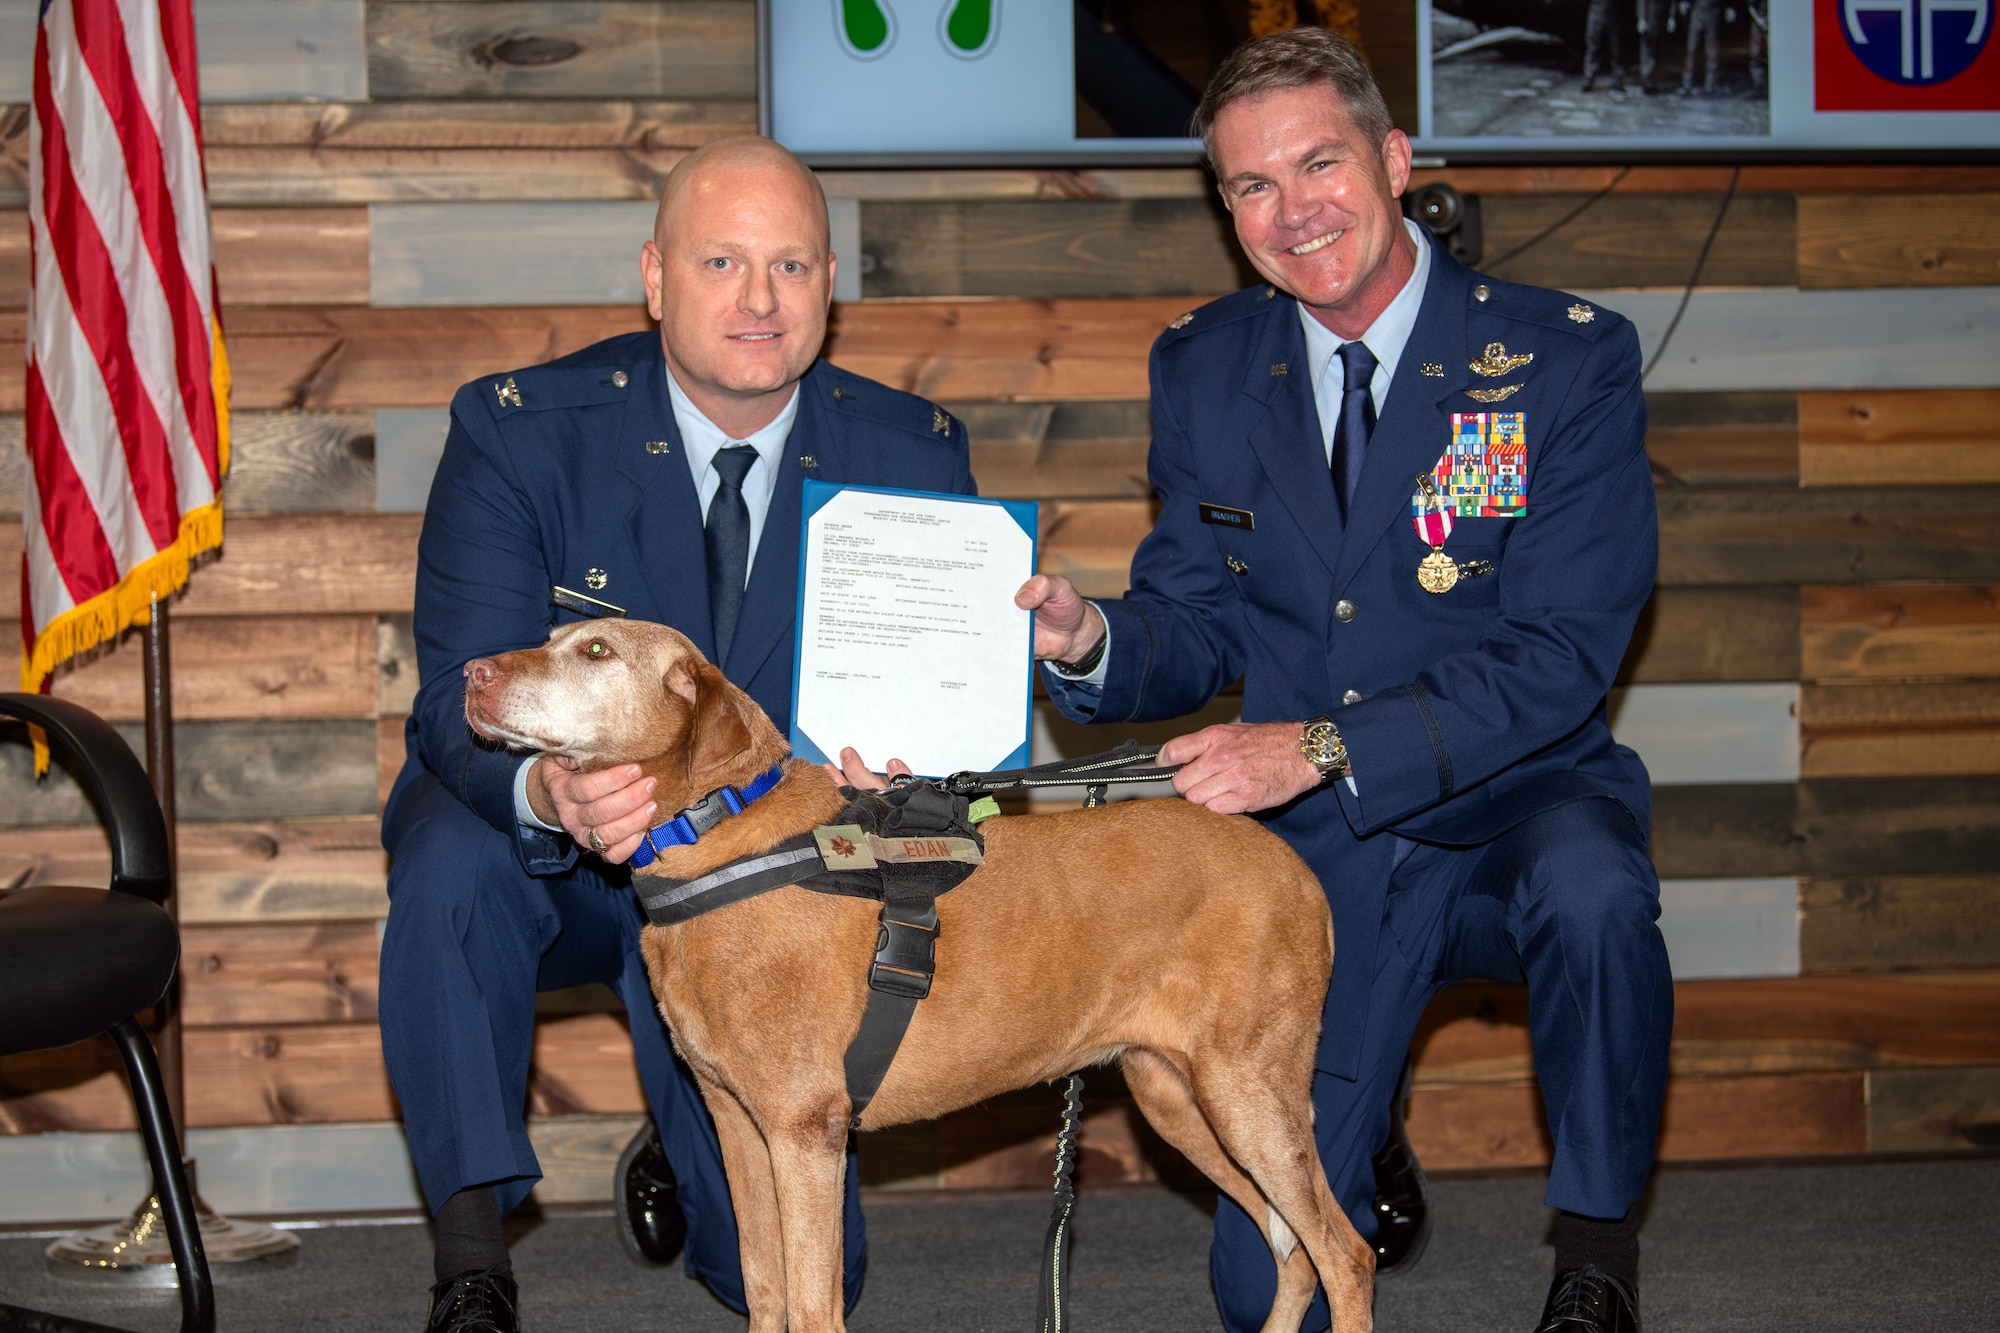 Two Airmen in service dress hold a retirement certificate with a dog in-between them on a wooden stage.